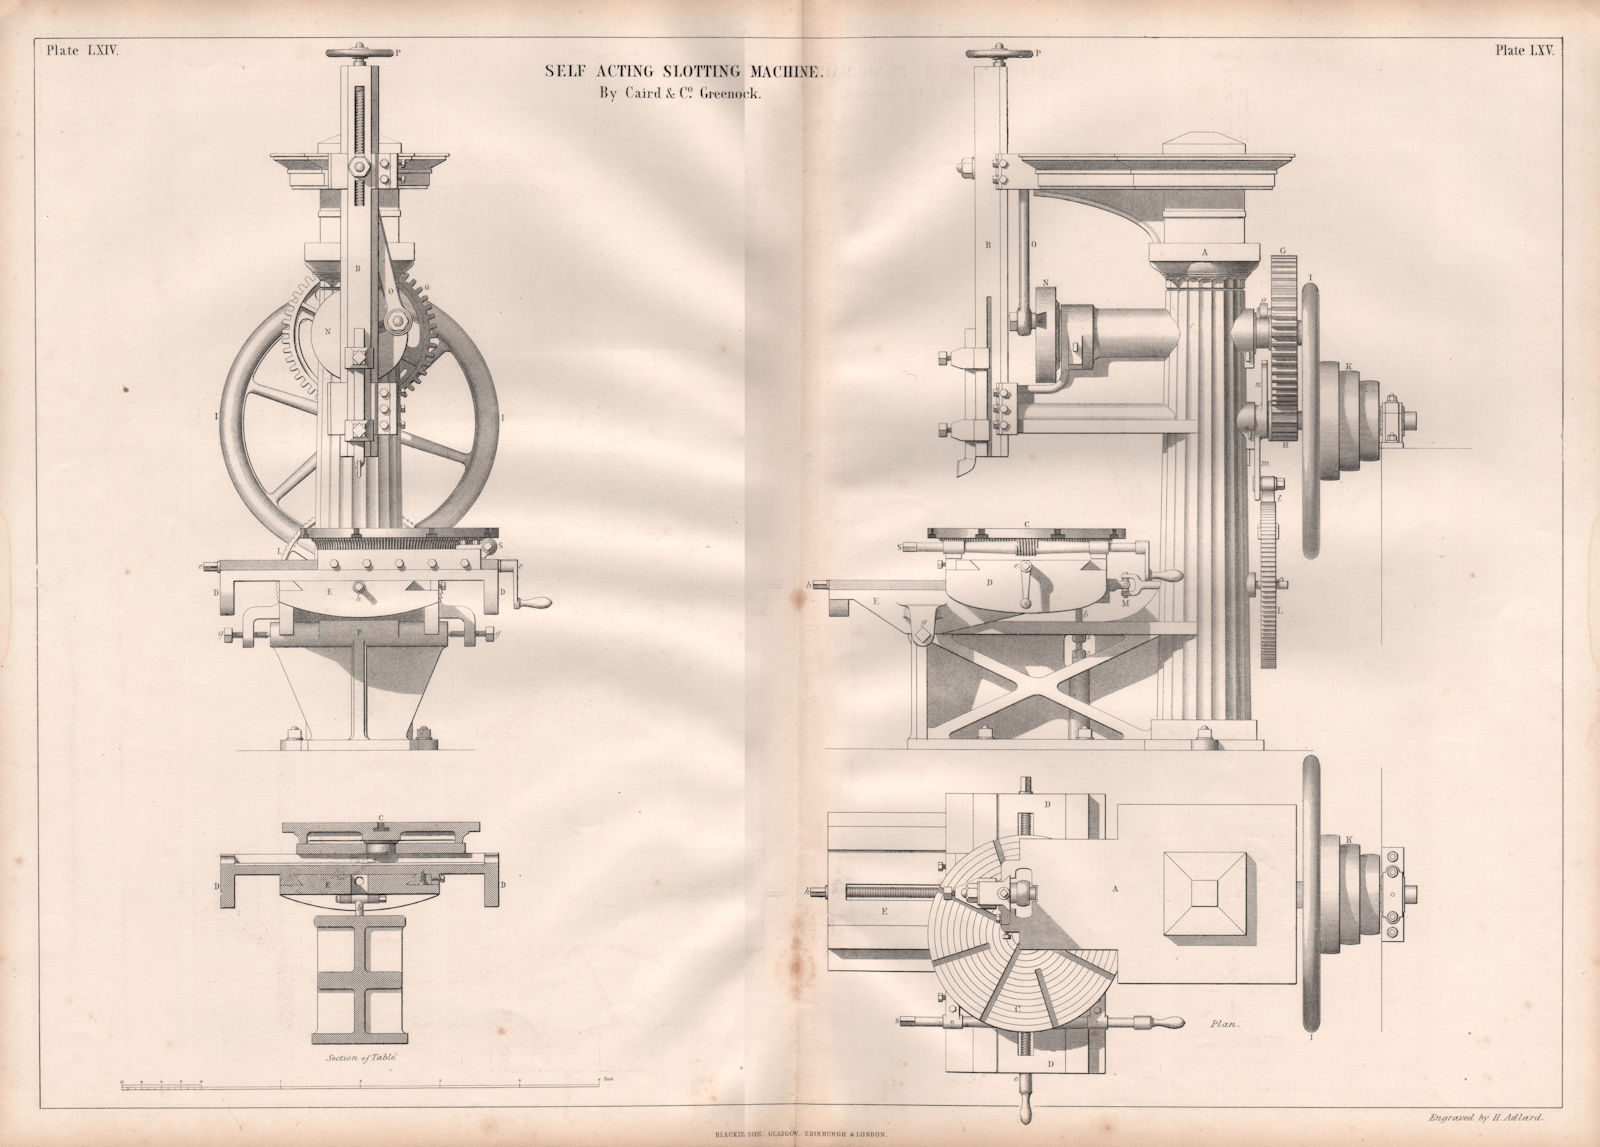 VICTORIAN ENGINEERING DRAWING. Self acting slotting machine. Caird & Co. 1847